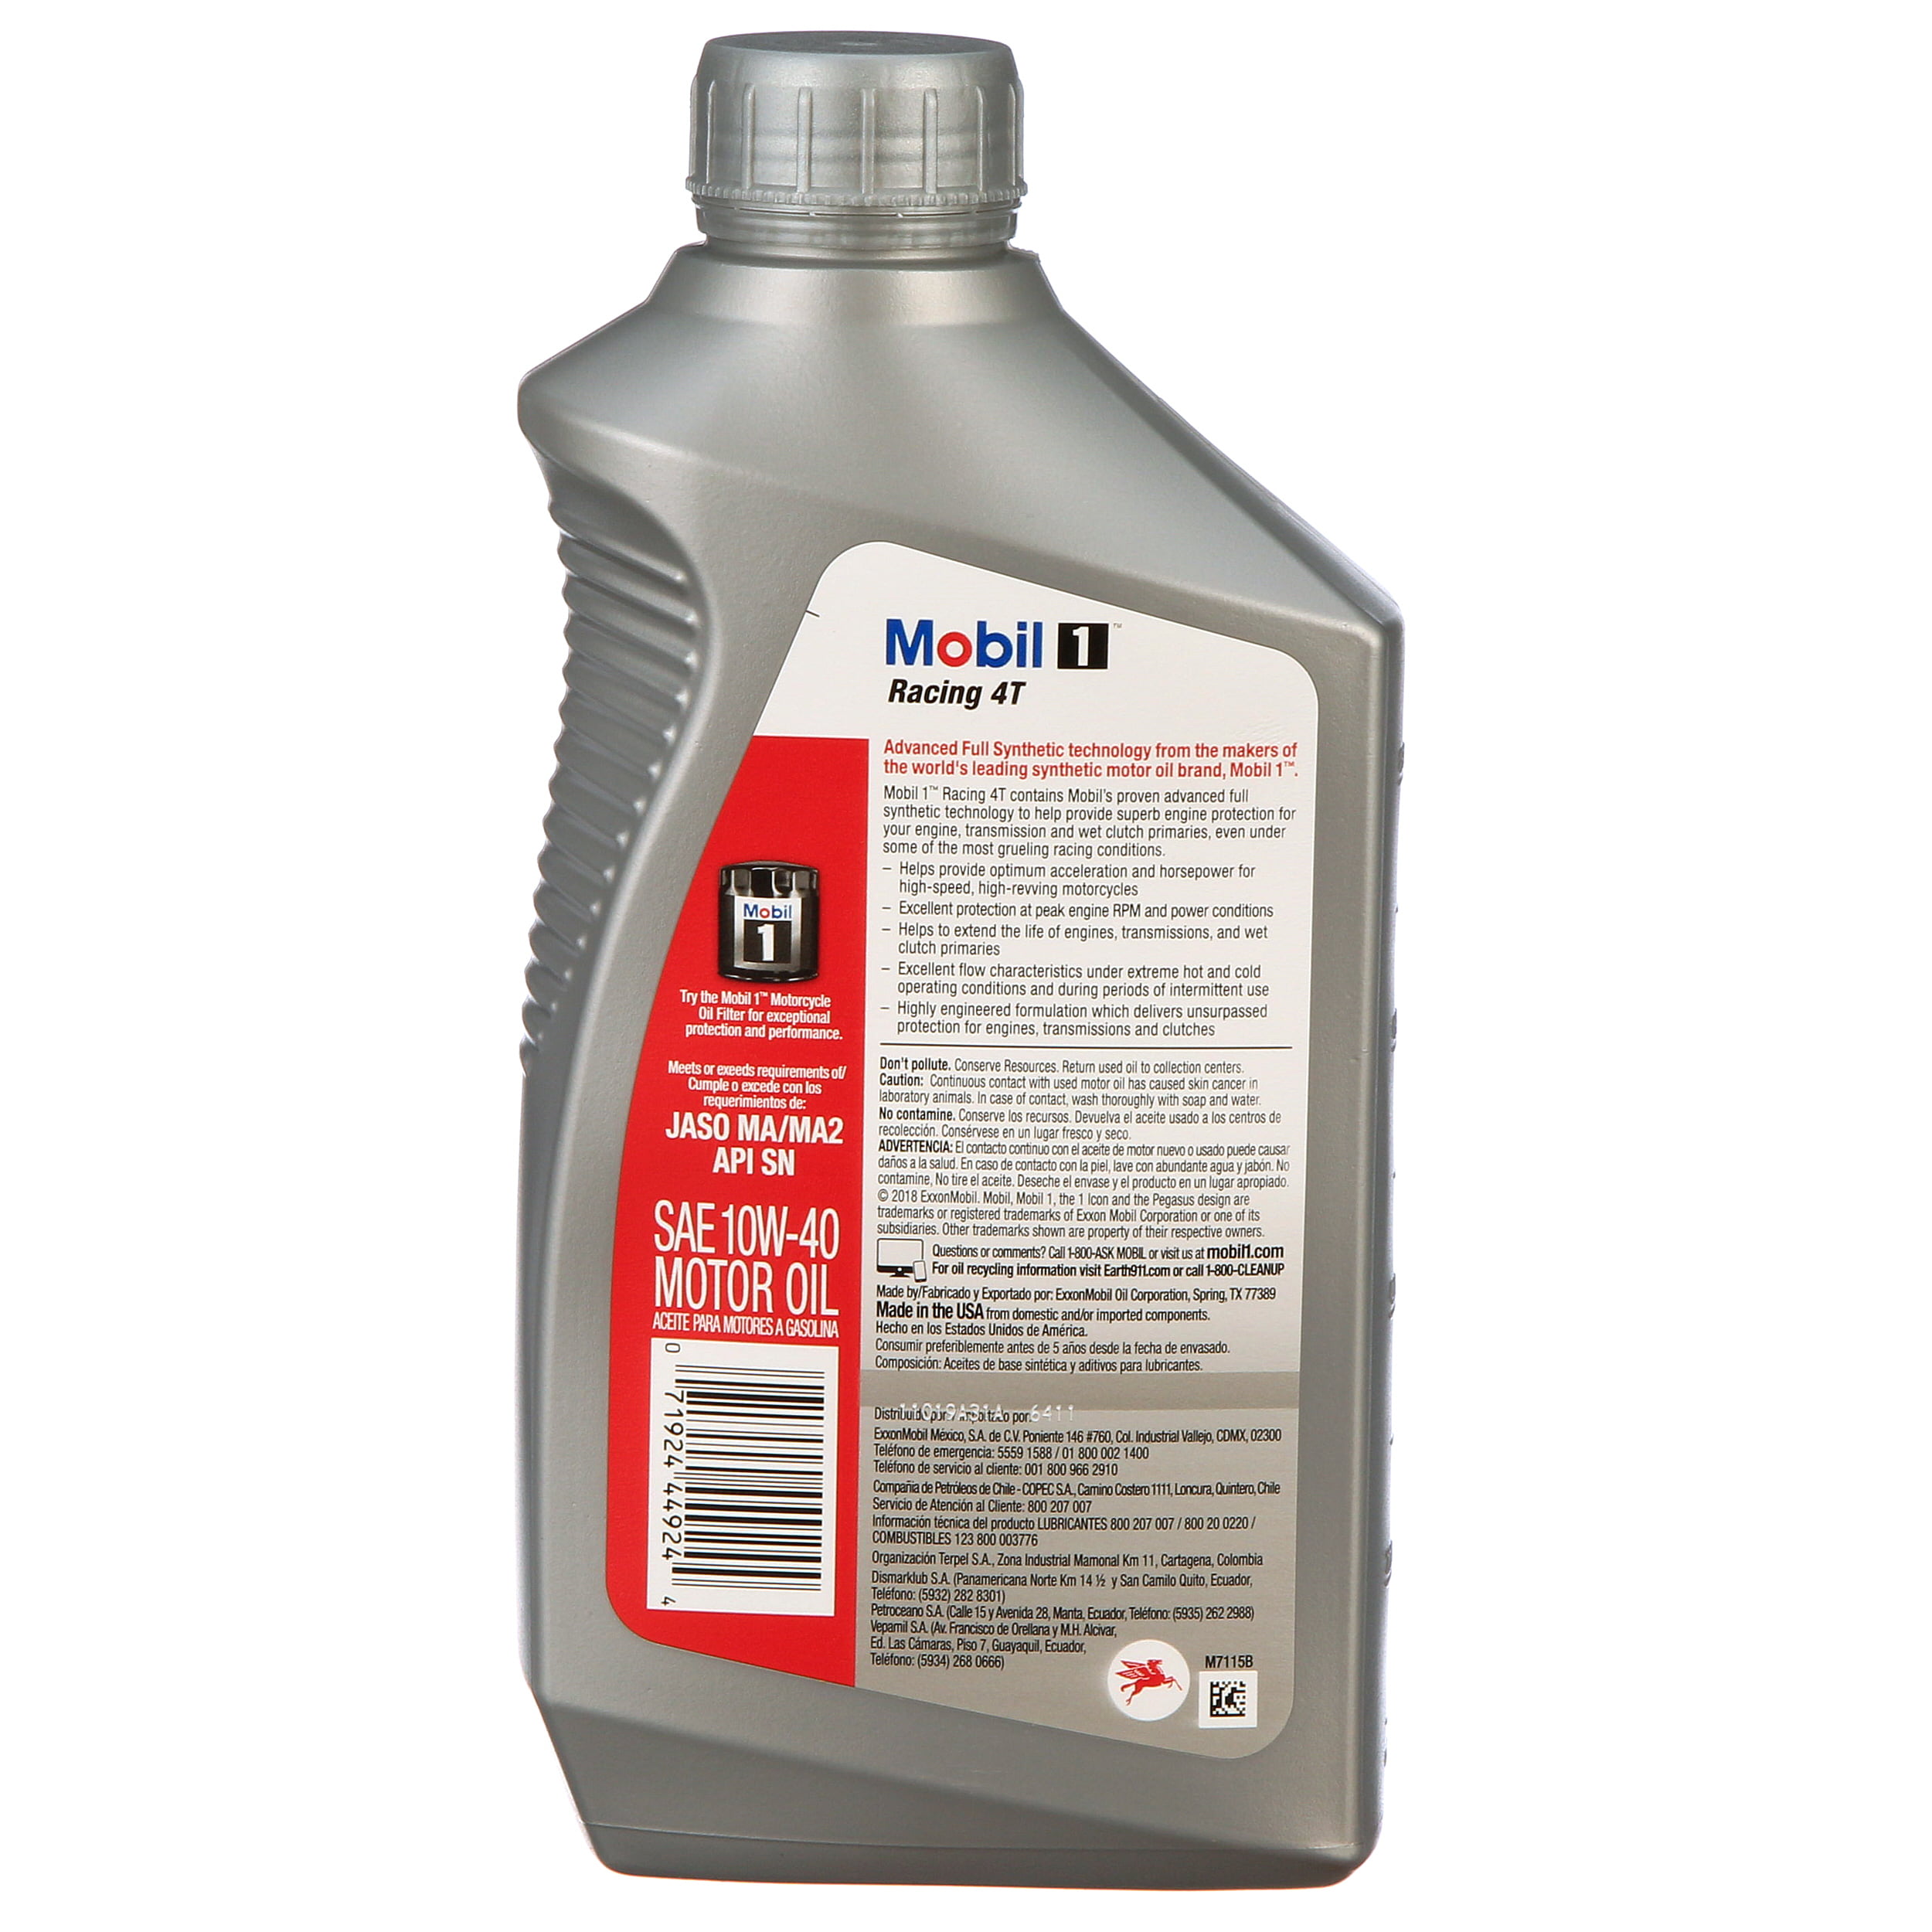 Mobil 1 Motorcycle Oil Filter Chart